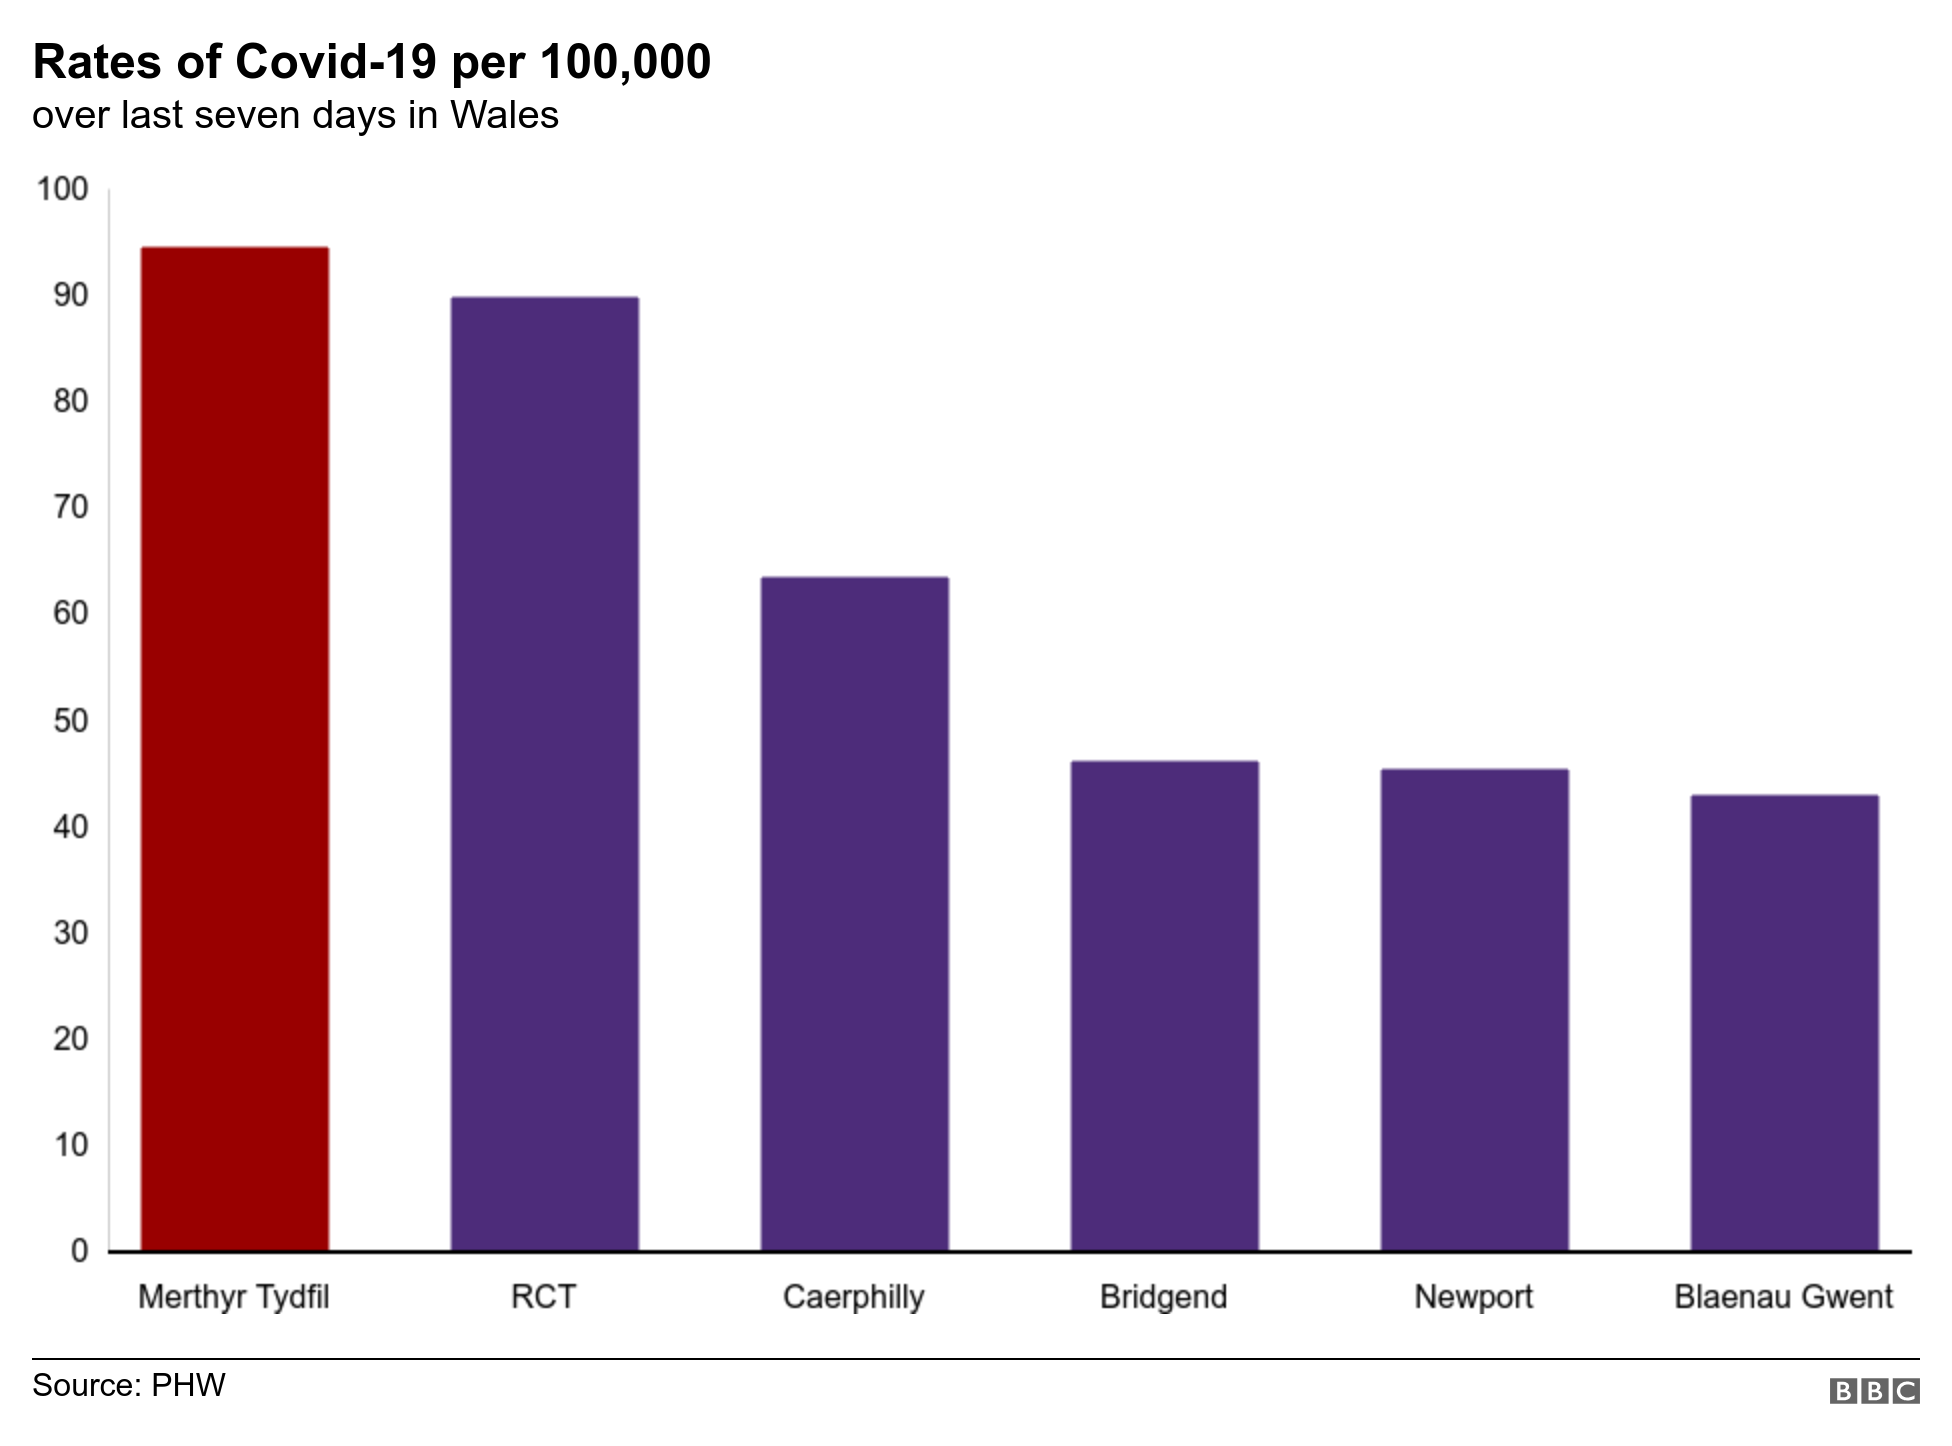 Graph showing covid rates per 100,000 for highest six counties in Wales over last seven days